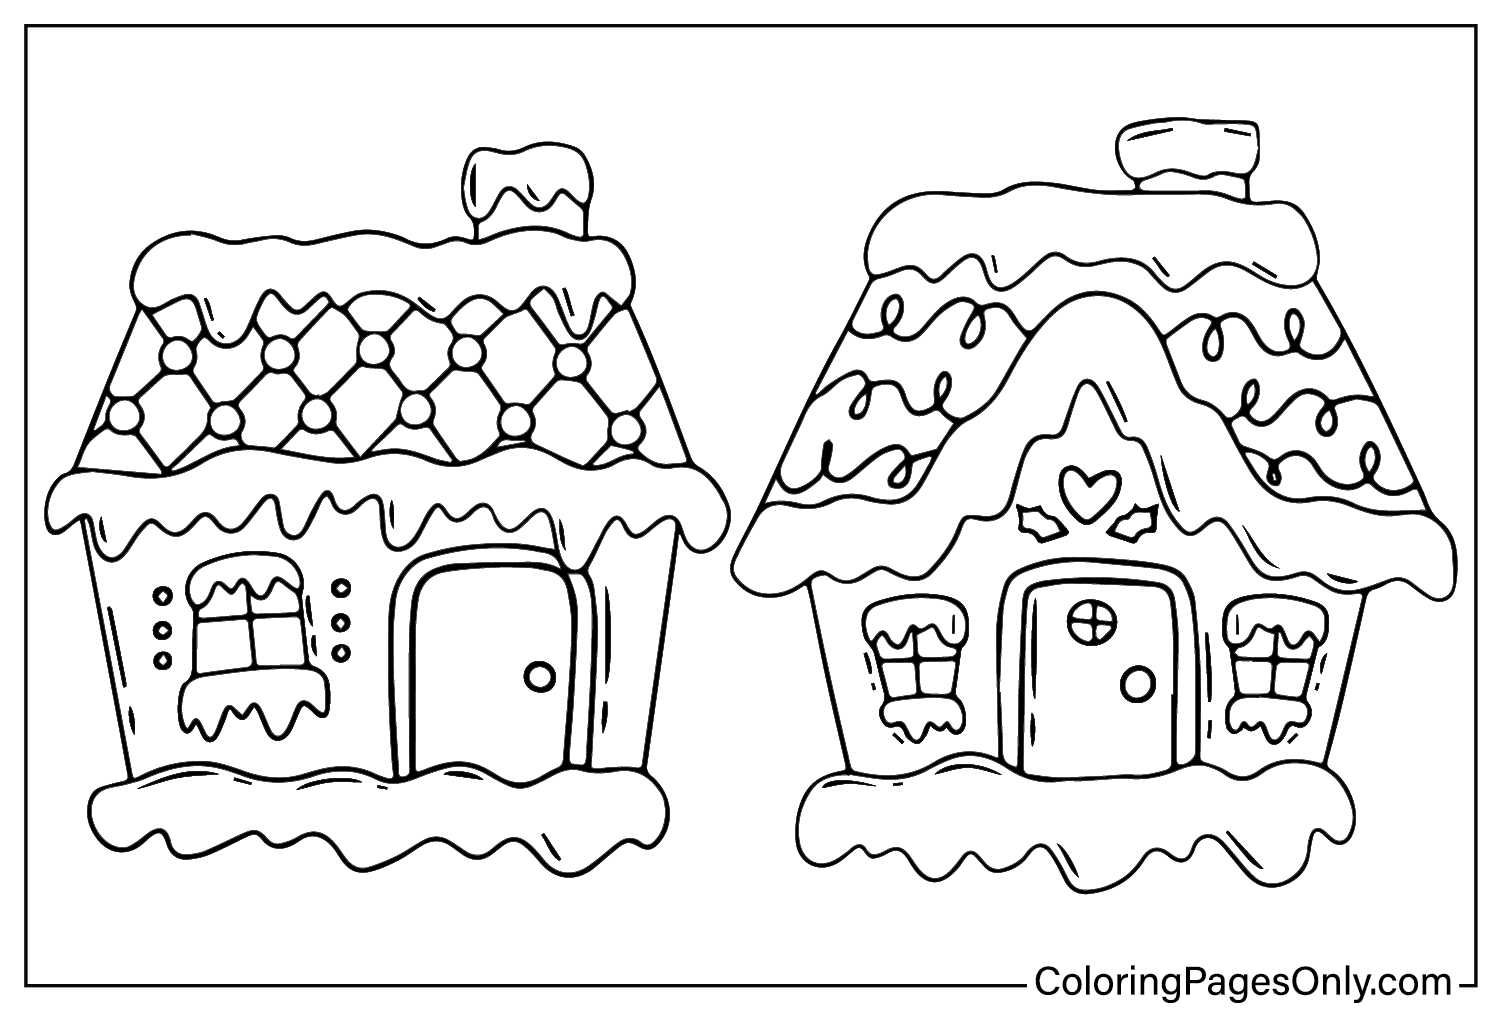 Gingerbread House Coloring Page to Print from Gingerbread House